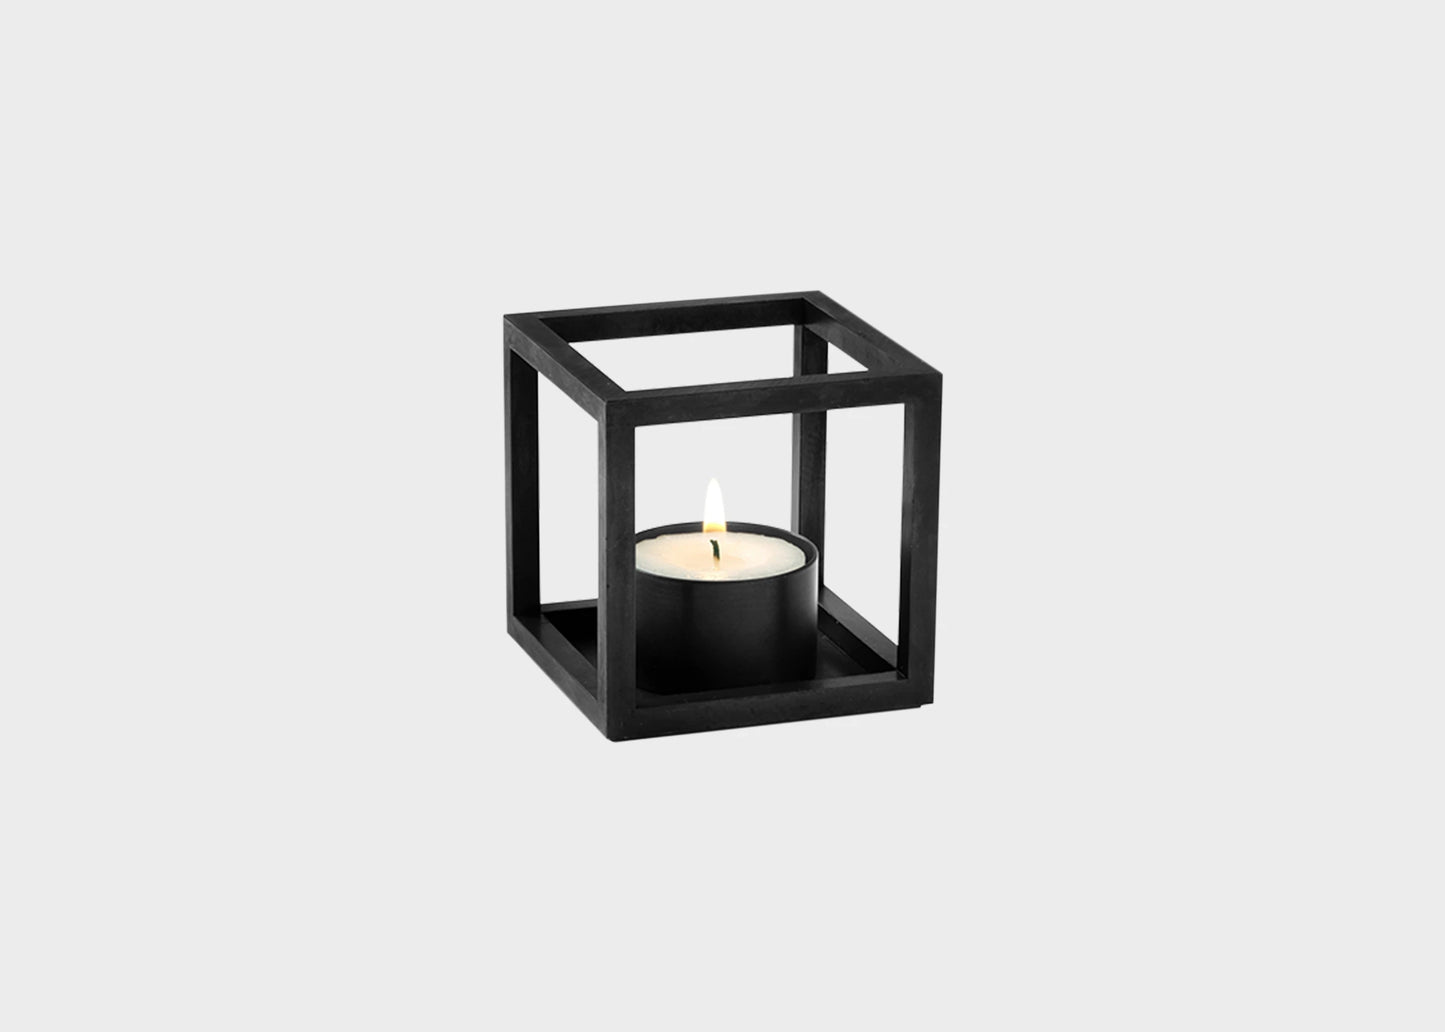 Kubus T Holder with lit tealight sold at Woodland Mod